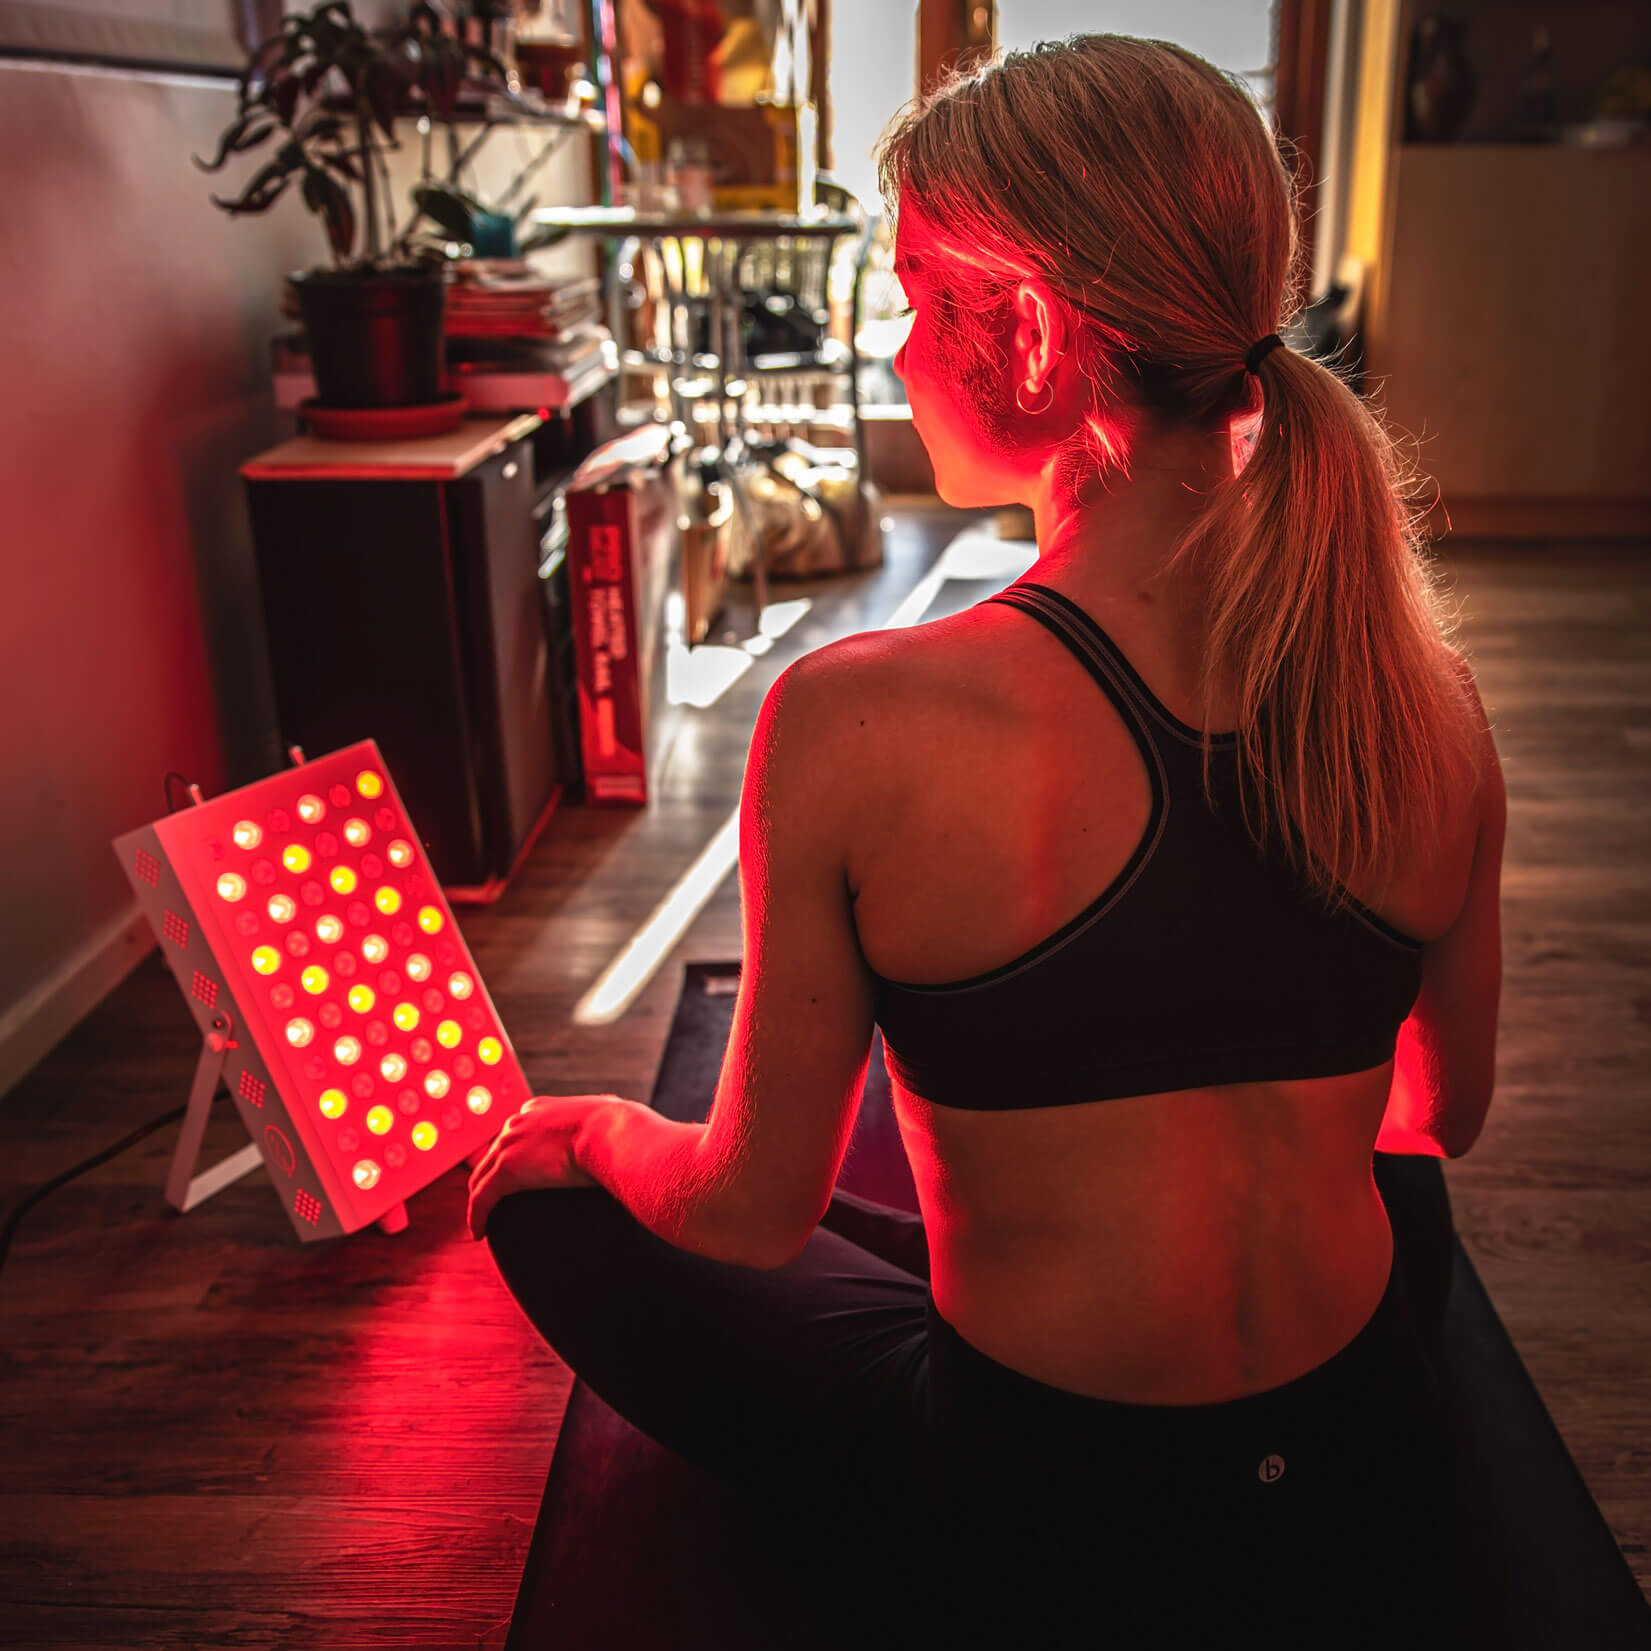 Debunking Myths and Misconceptions about Red Light Therapy